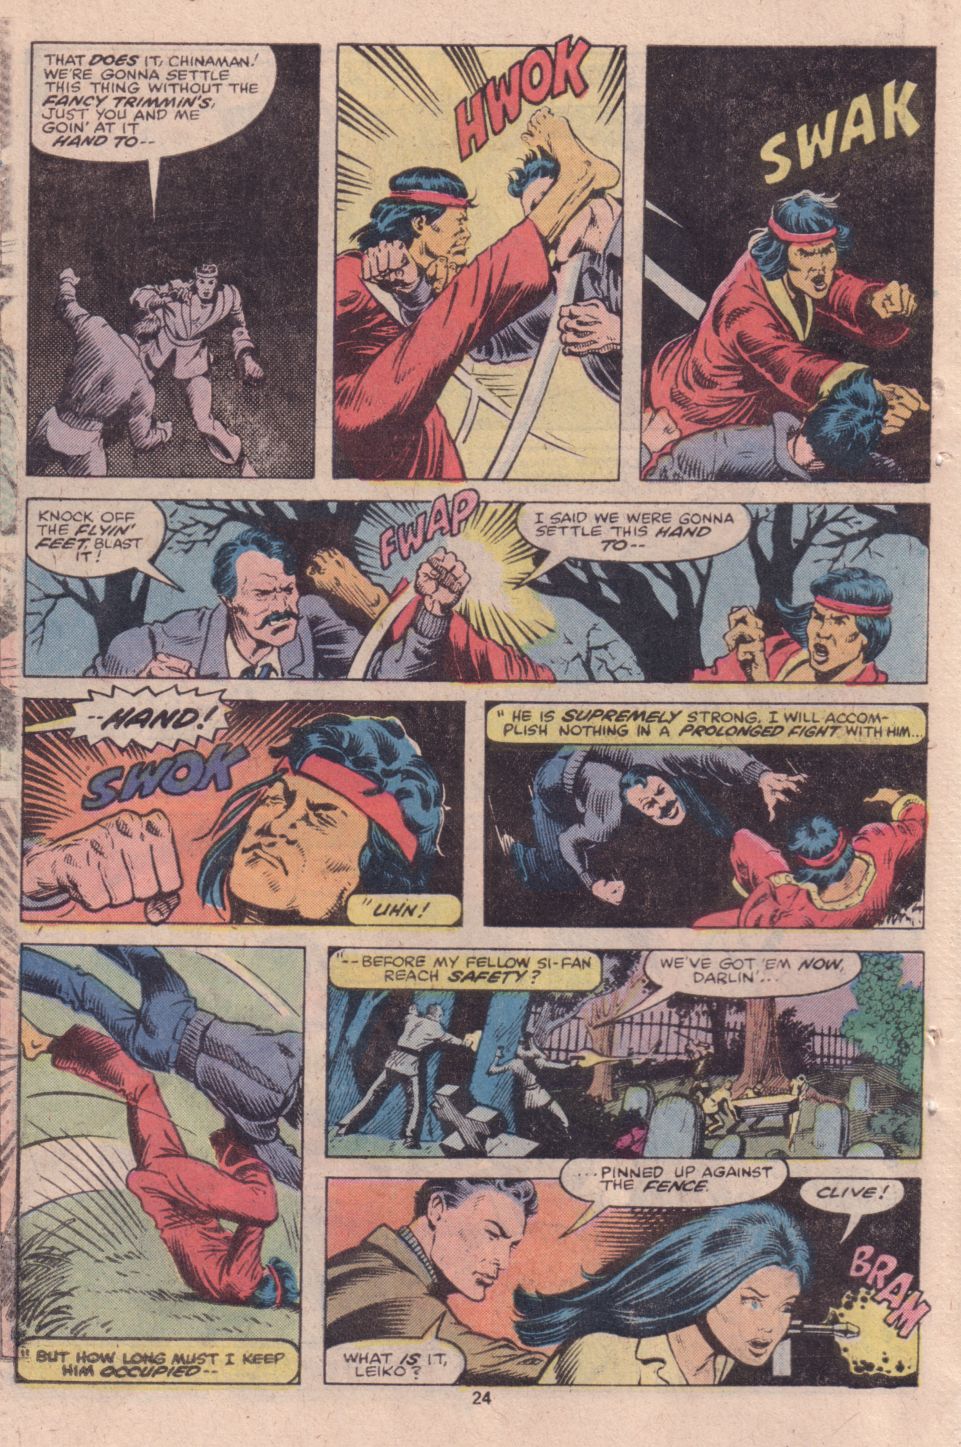 What If? (1977) issue 16 - Shang Chi Master of Kung Fu fought on The side of Fu Manchu - Page 19